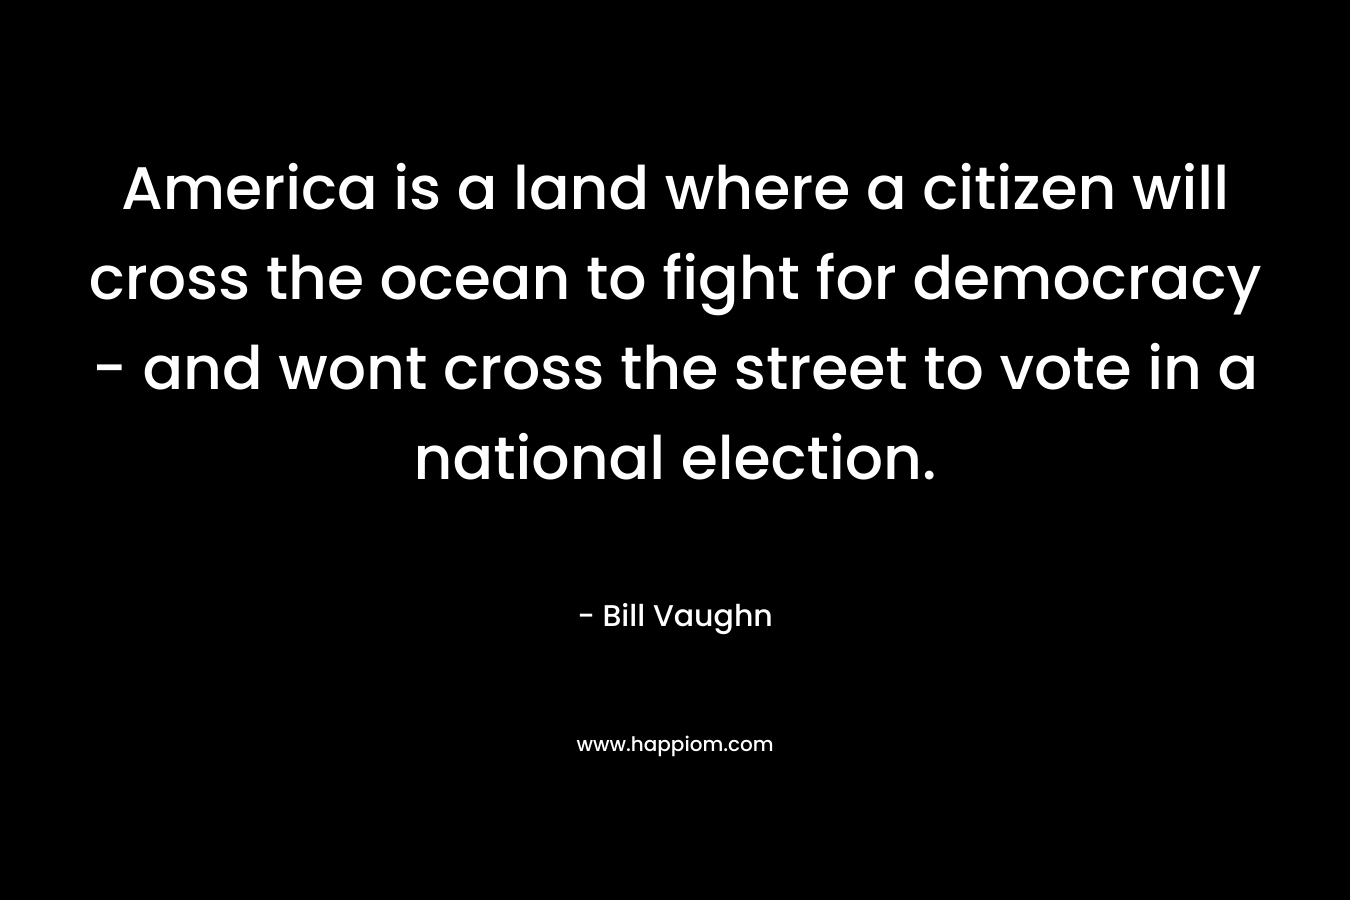 America is a land where a citizen will cross the ocean to fight for democracy - and wont cross the street to vote in a national election.